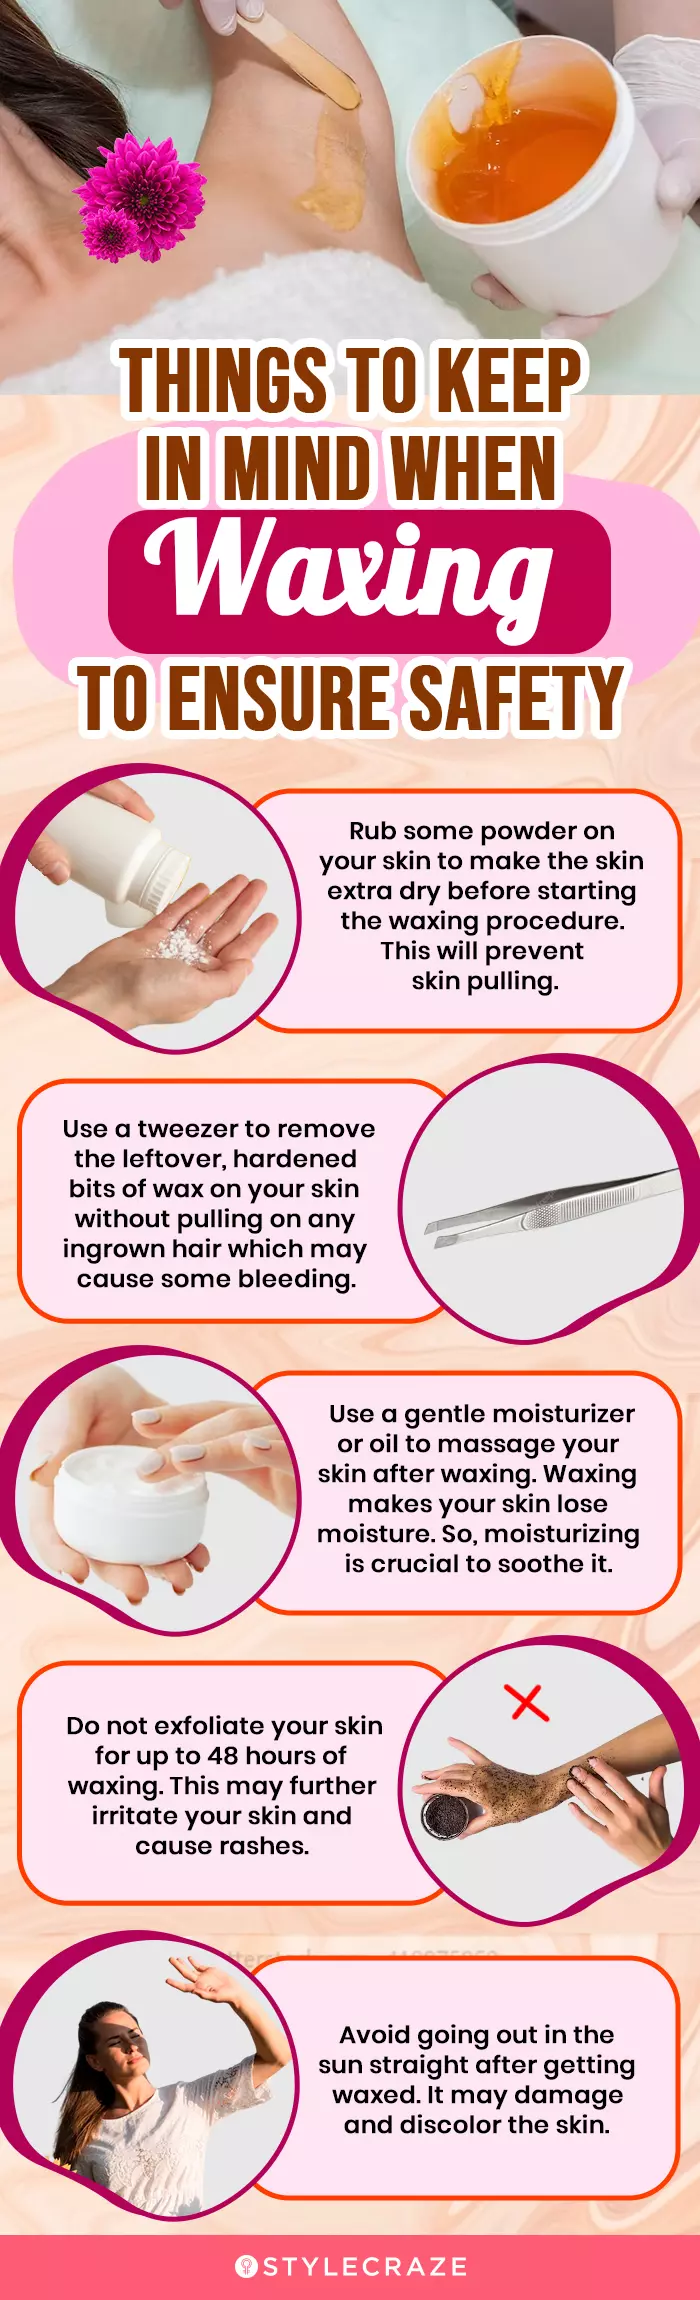 Things To Keep In Mind When Waxing To Ensure Safety(infographic)